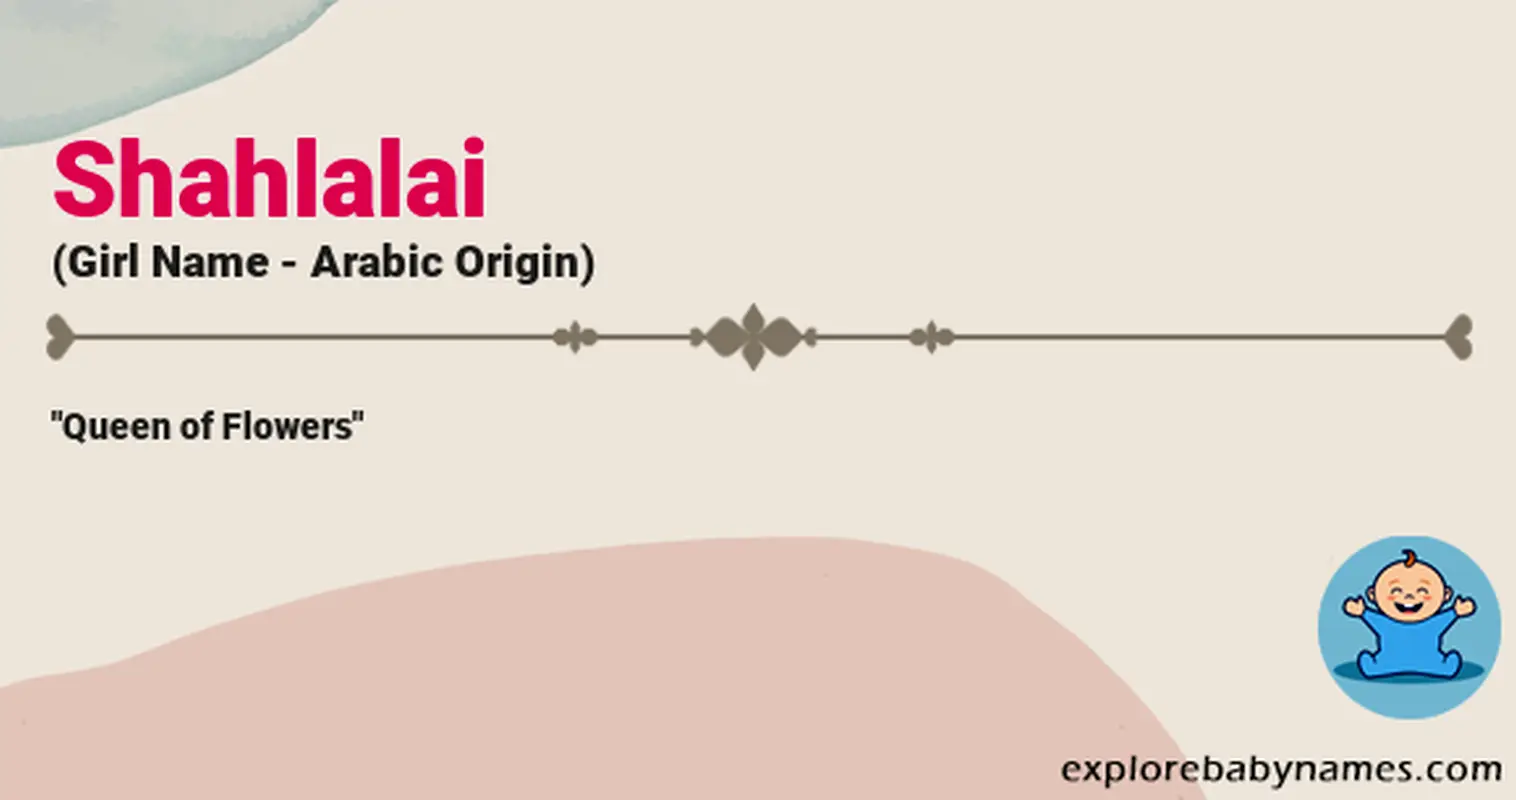 Meaning of Shahlalai